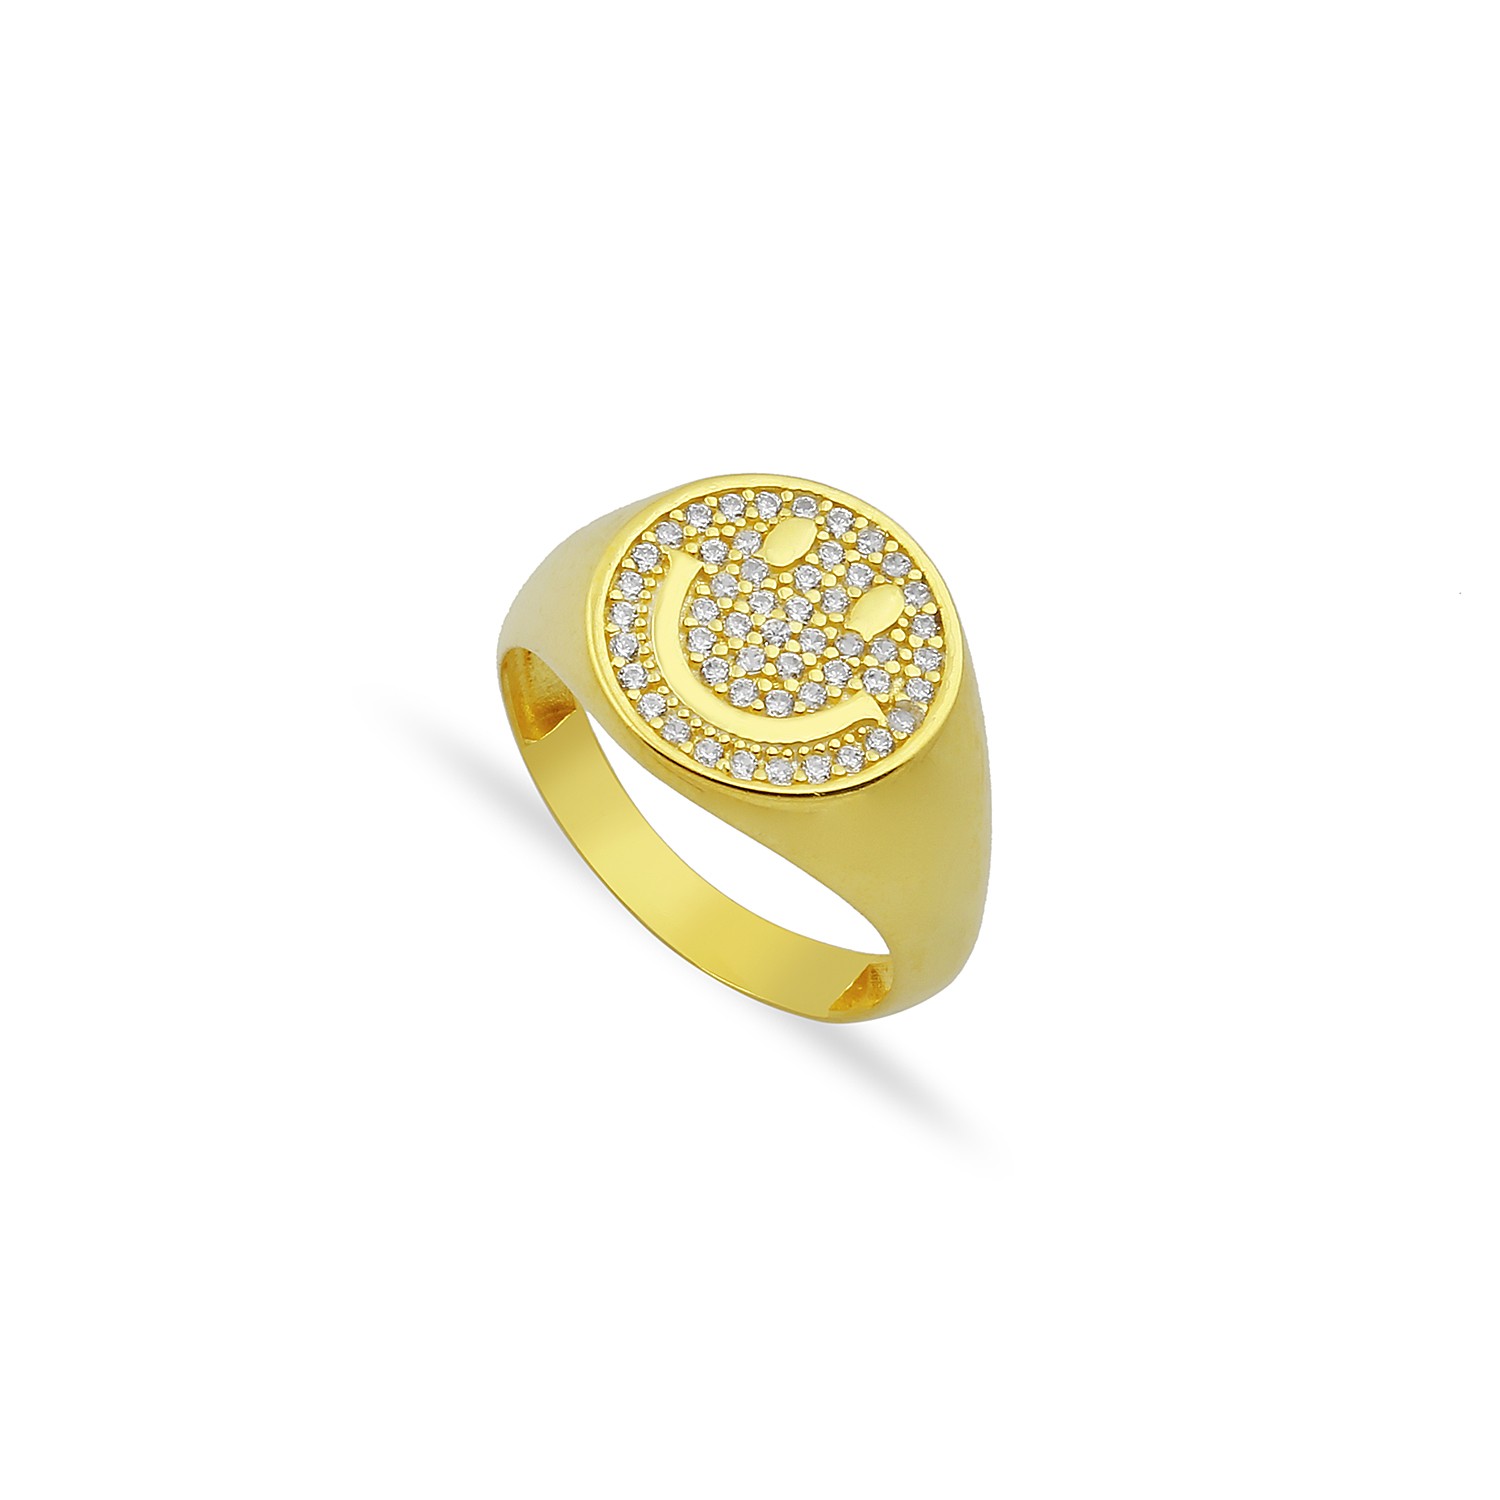 Sterling Silver Yellow Gold Plated Pave Smiley Face Ring With Cubic Zirconia